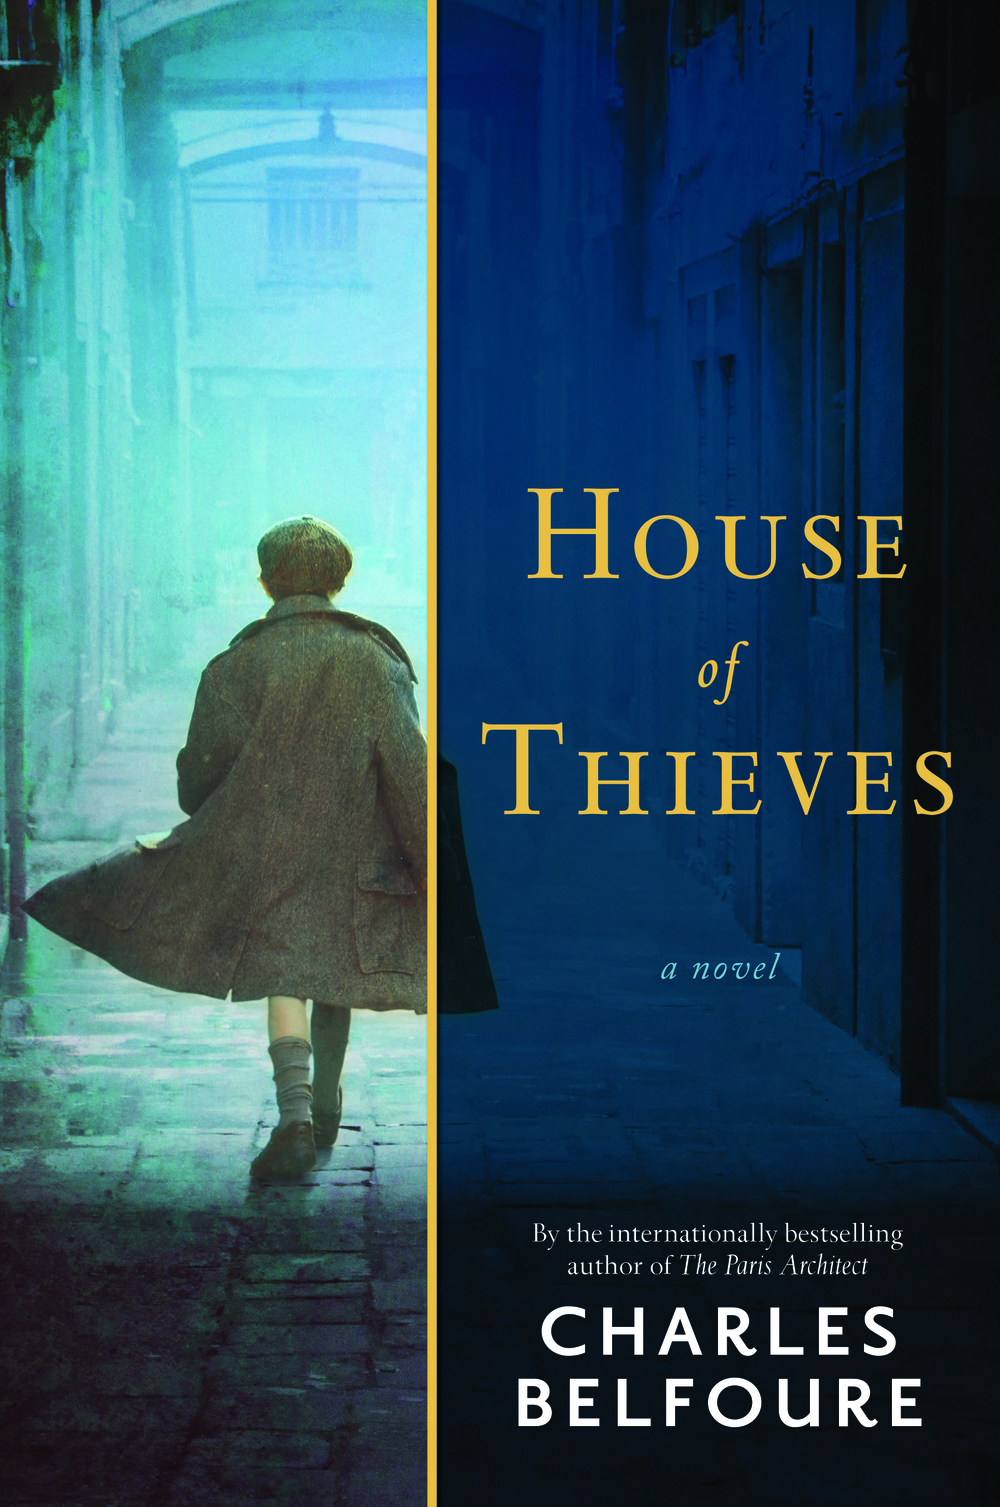 book review, house of thieves, charles belfoure